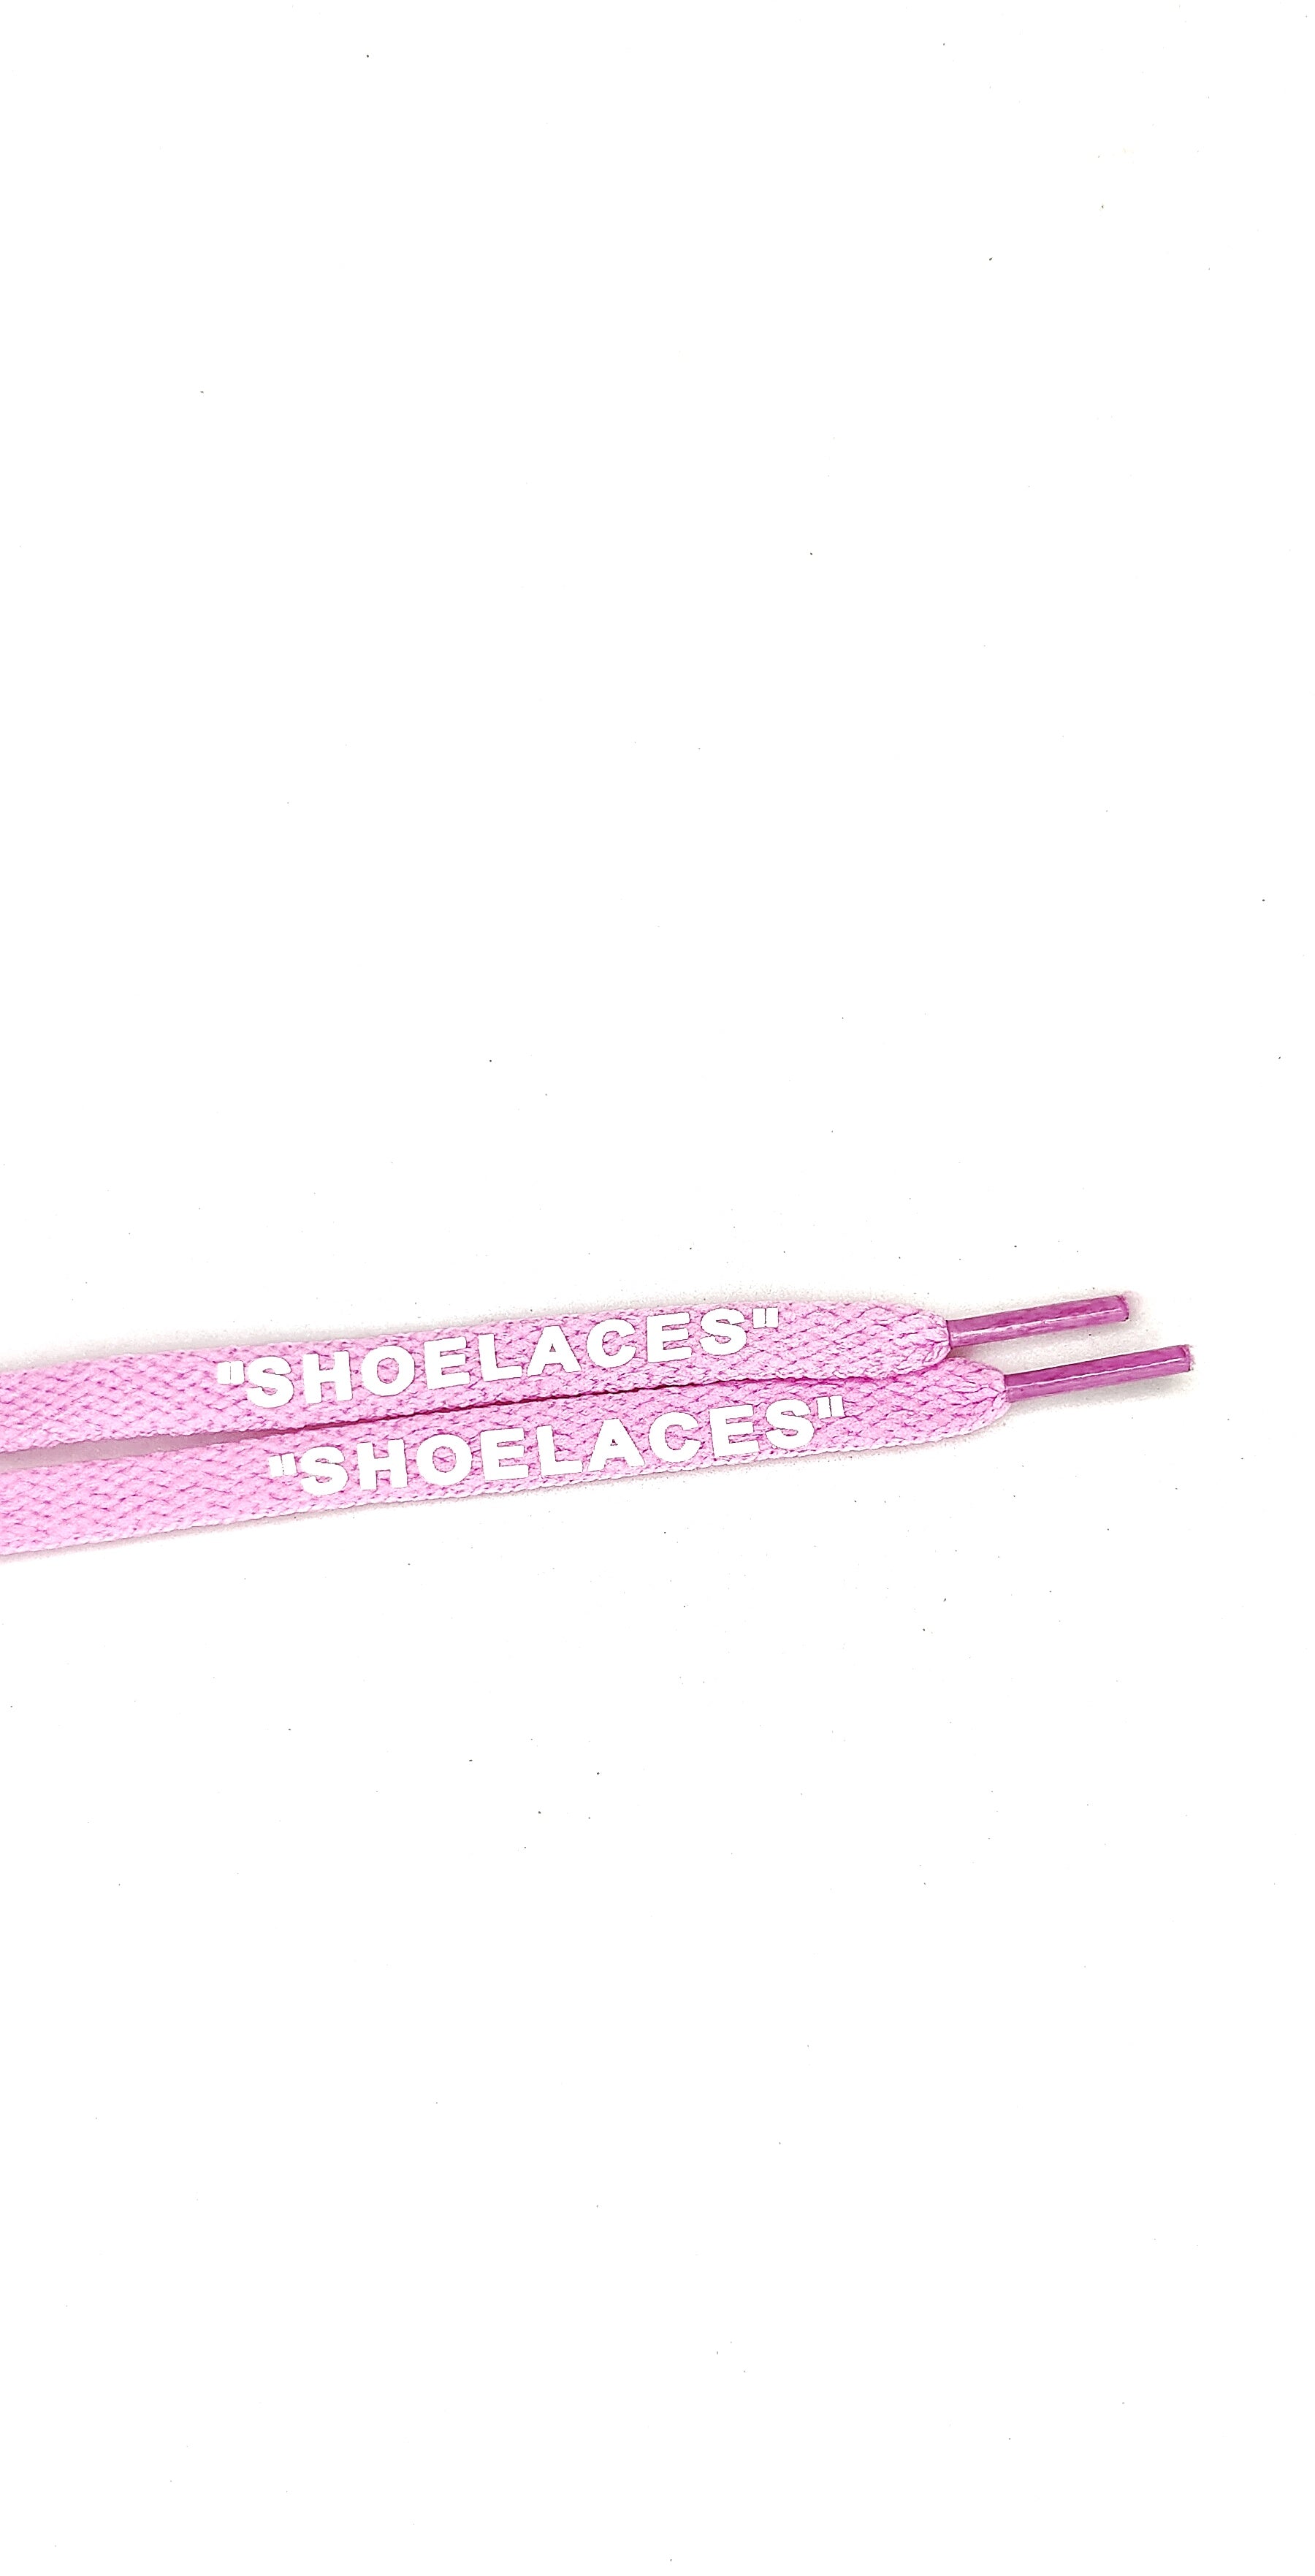 BABY PINK OFF-WHITE STYLE "SHOELACES" BY TGLC